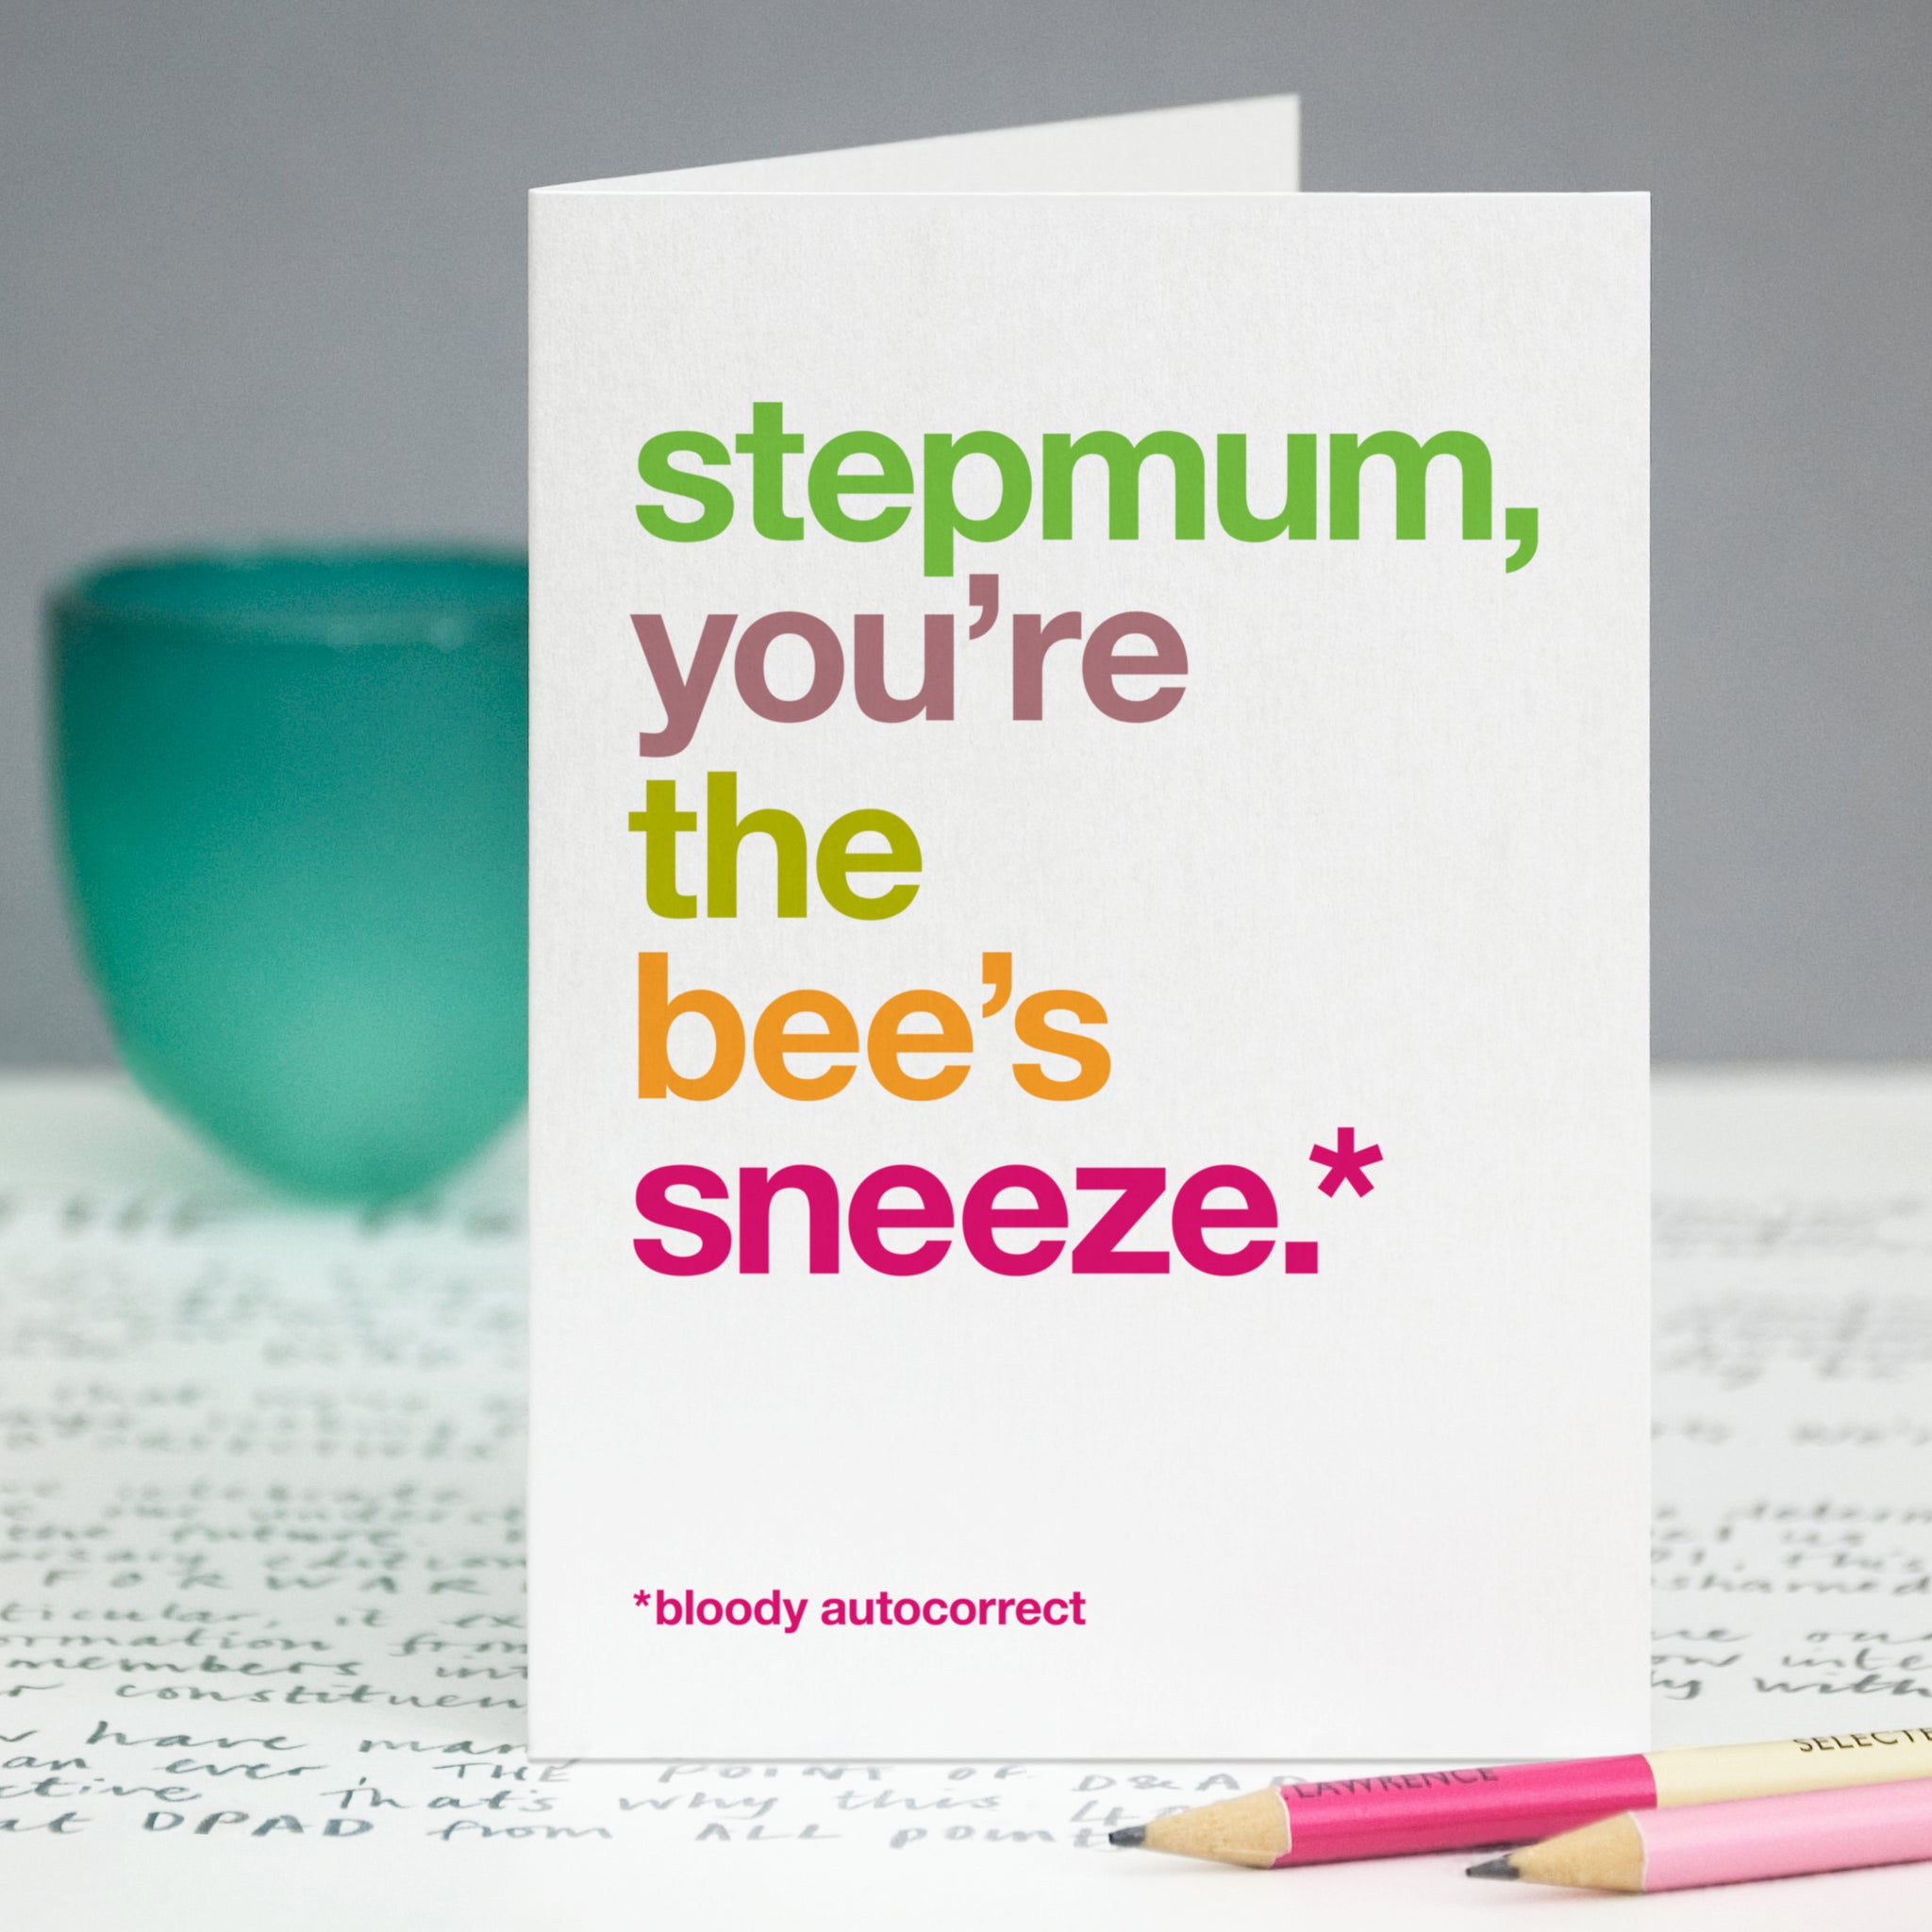 A greetings card with the text 'stepmum, you're the bee's sneeze, bloody autocorrect'.